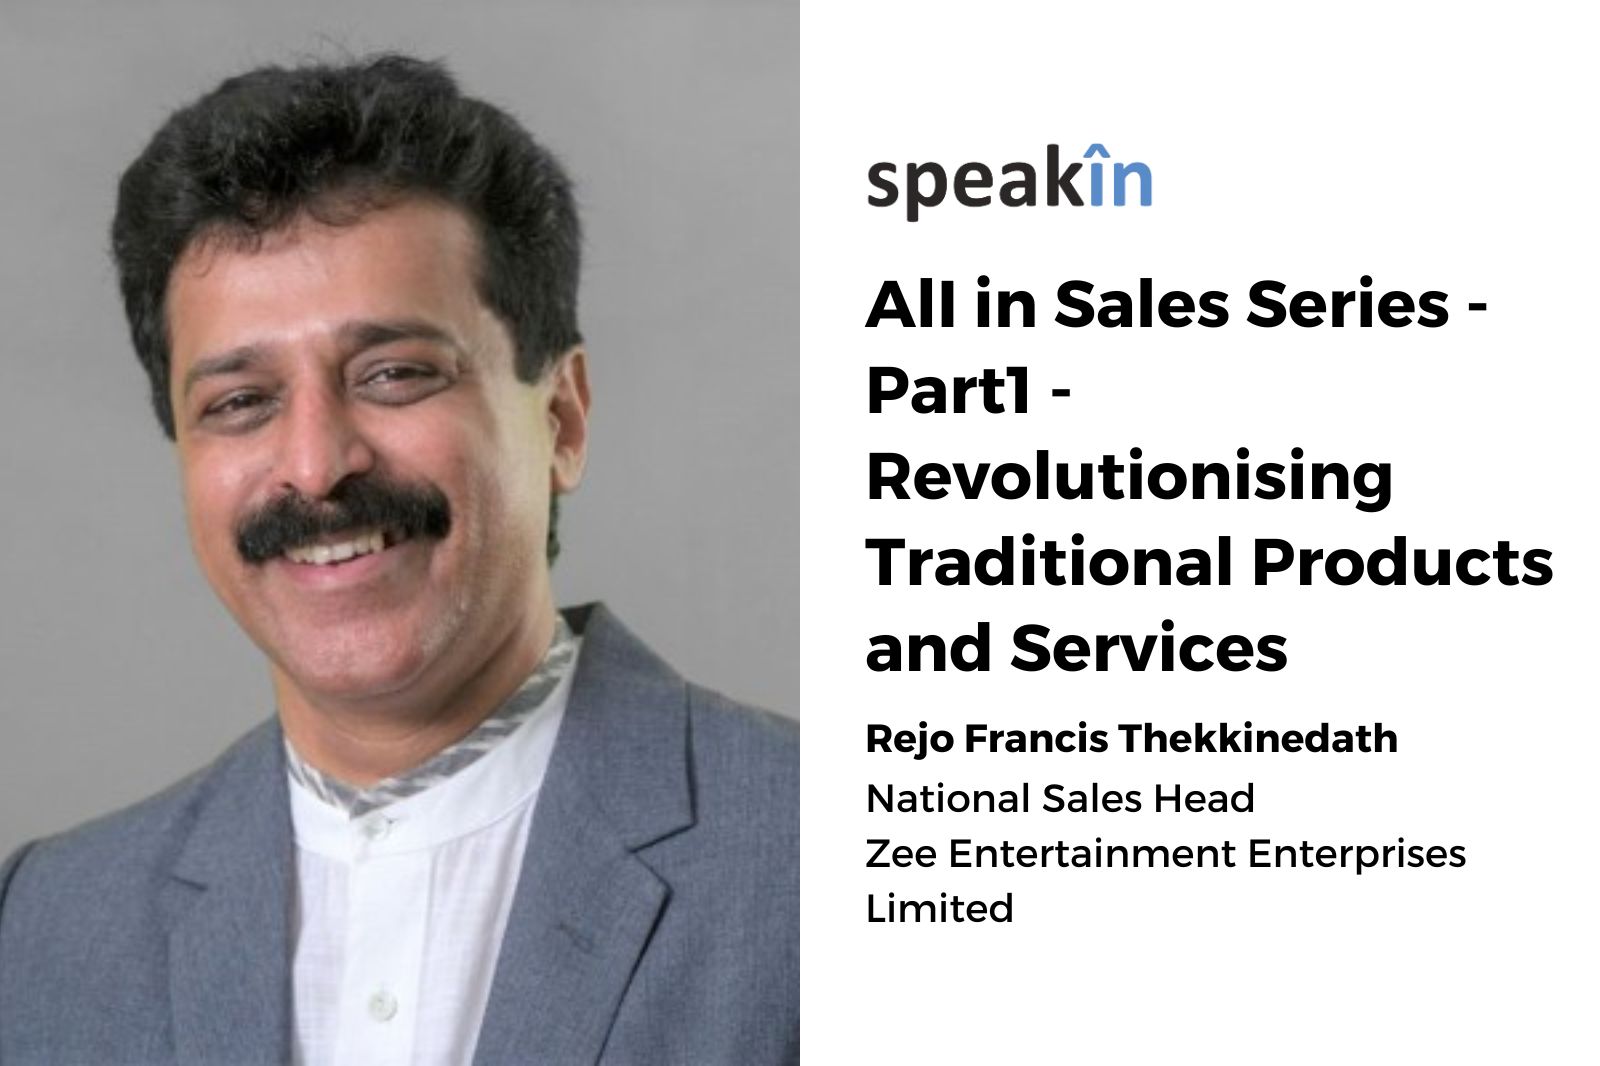 AlI in Sales Series - Part1 - Revolutionising Traditional Products and Services